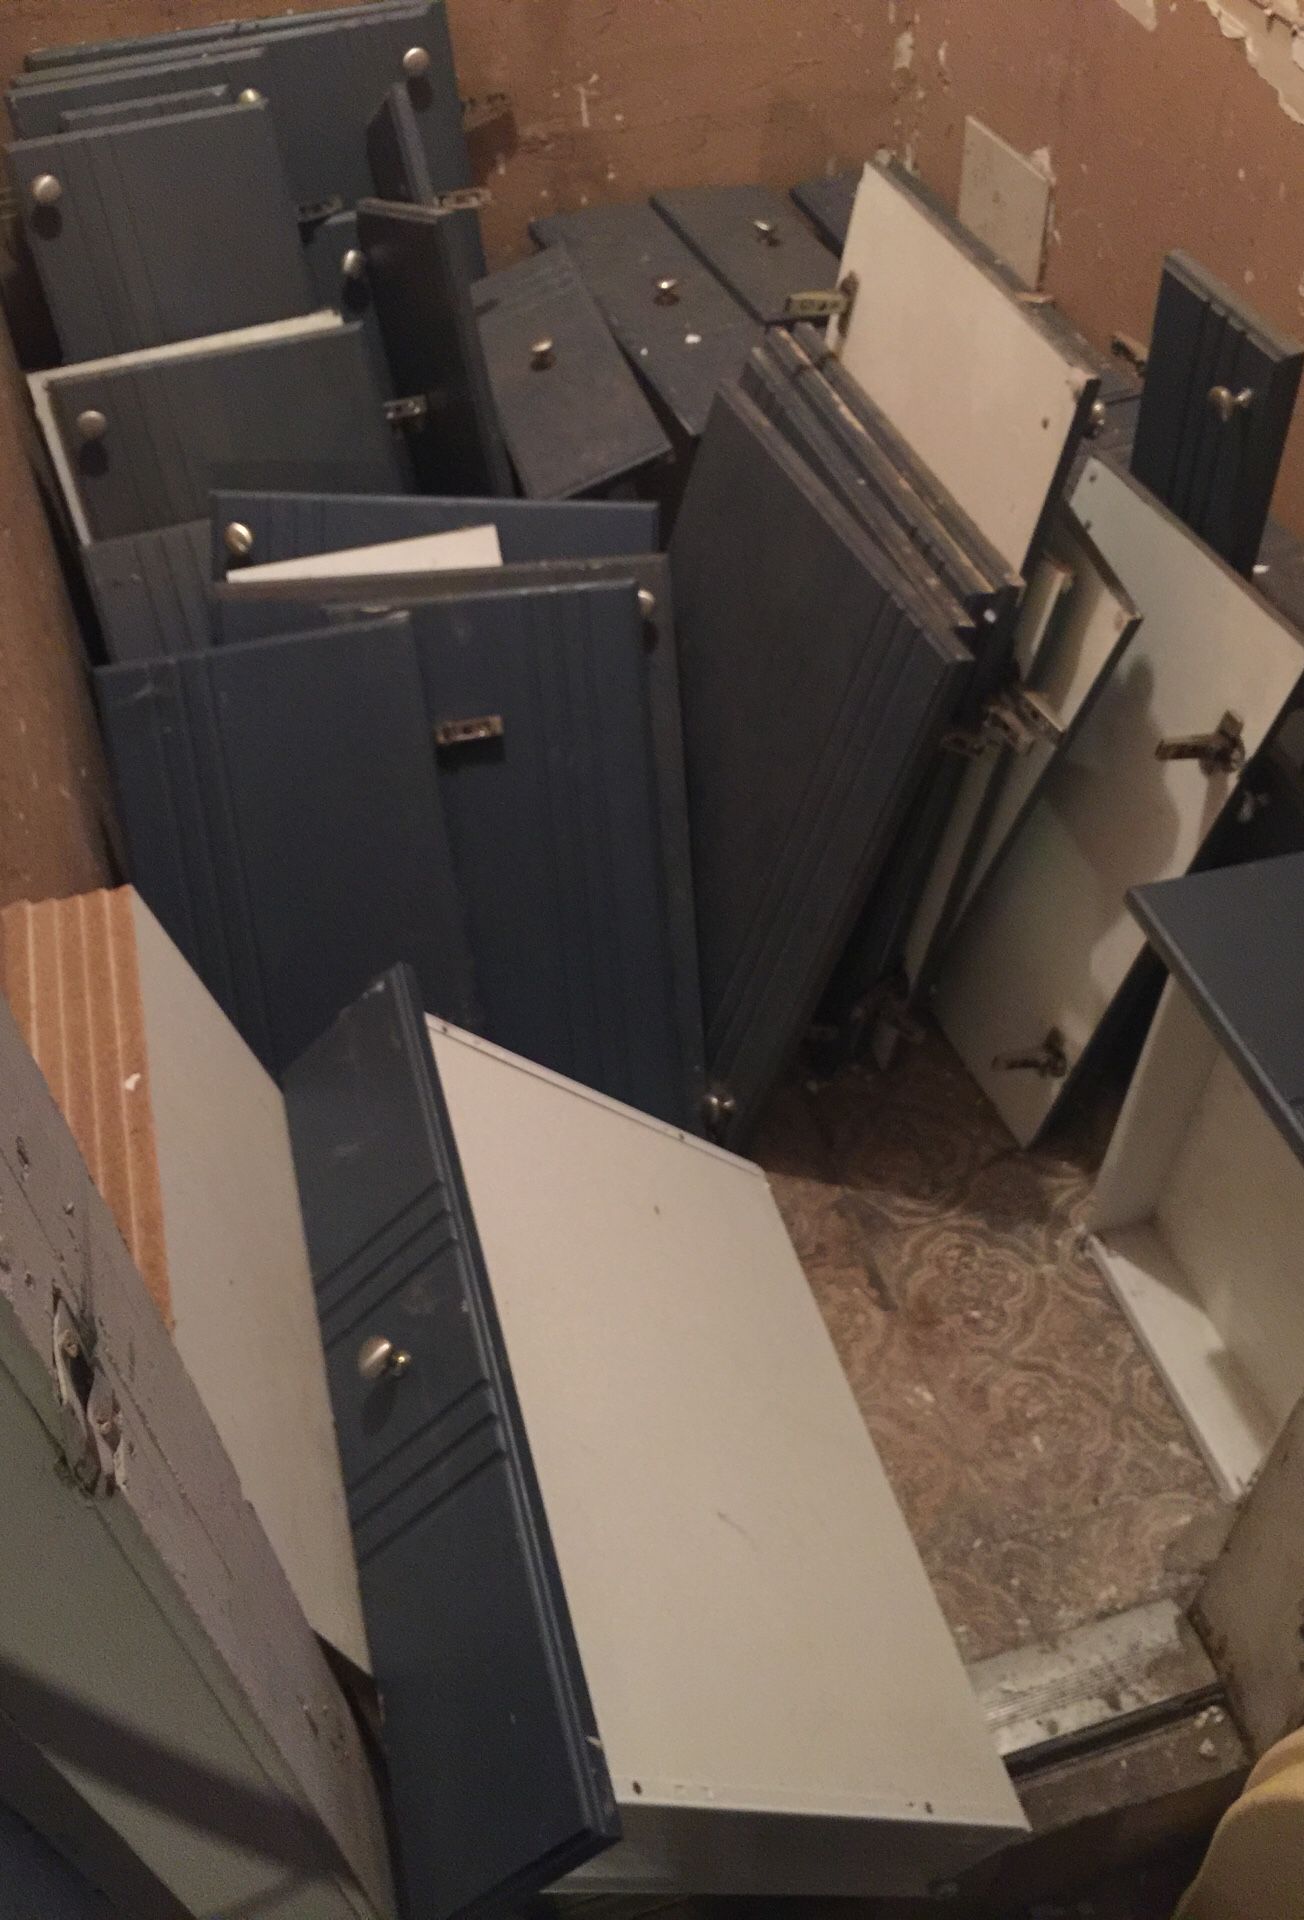 FREE! Kitchen drawers & cabinet doors with stainless steel knobs, and shelves...